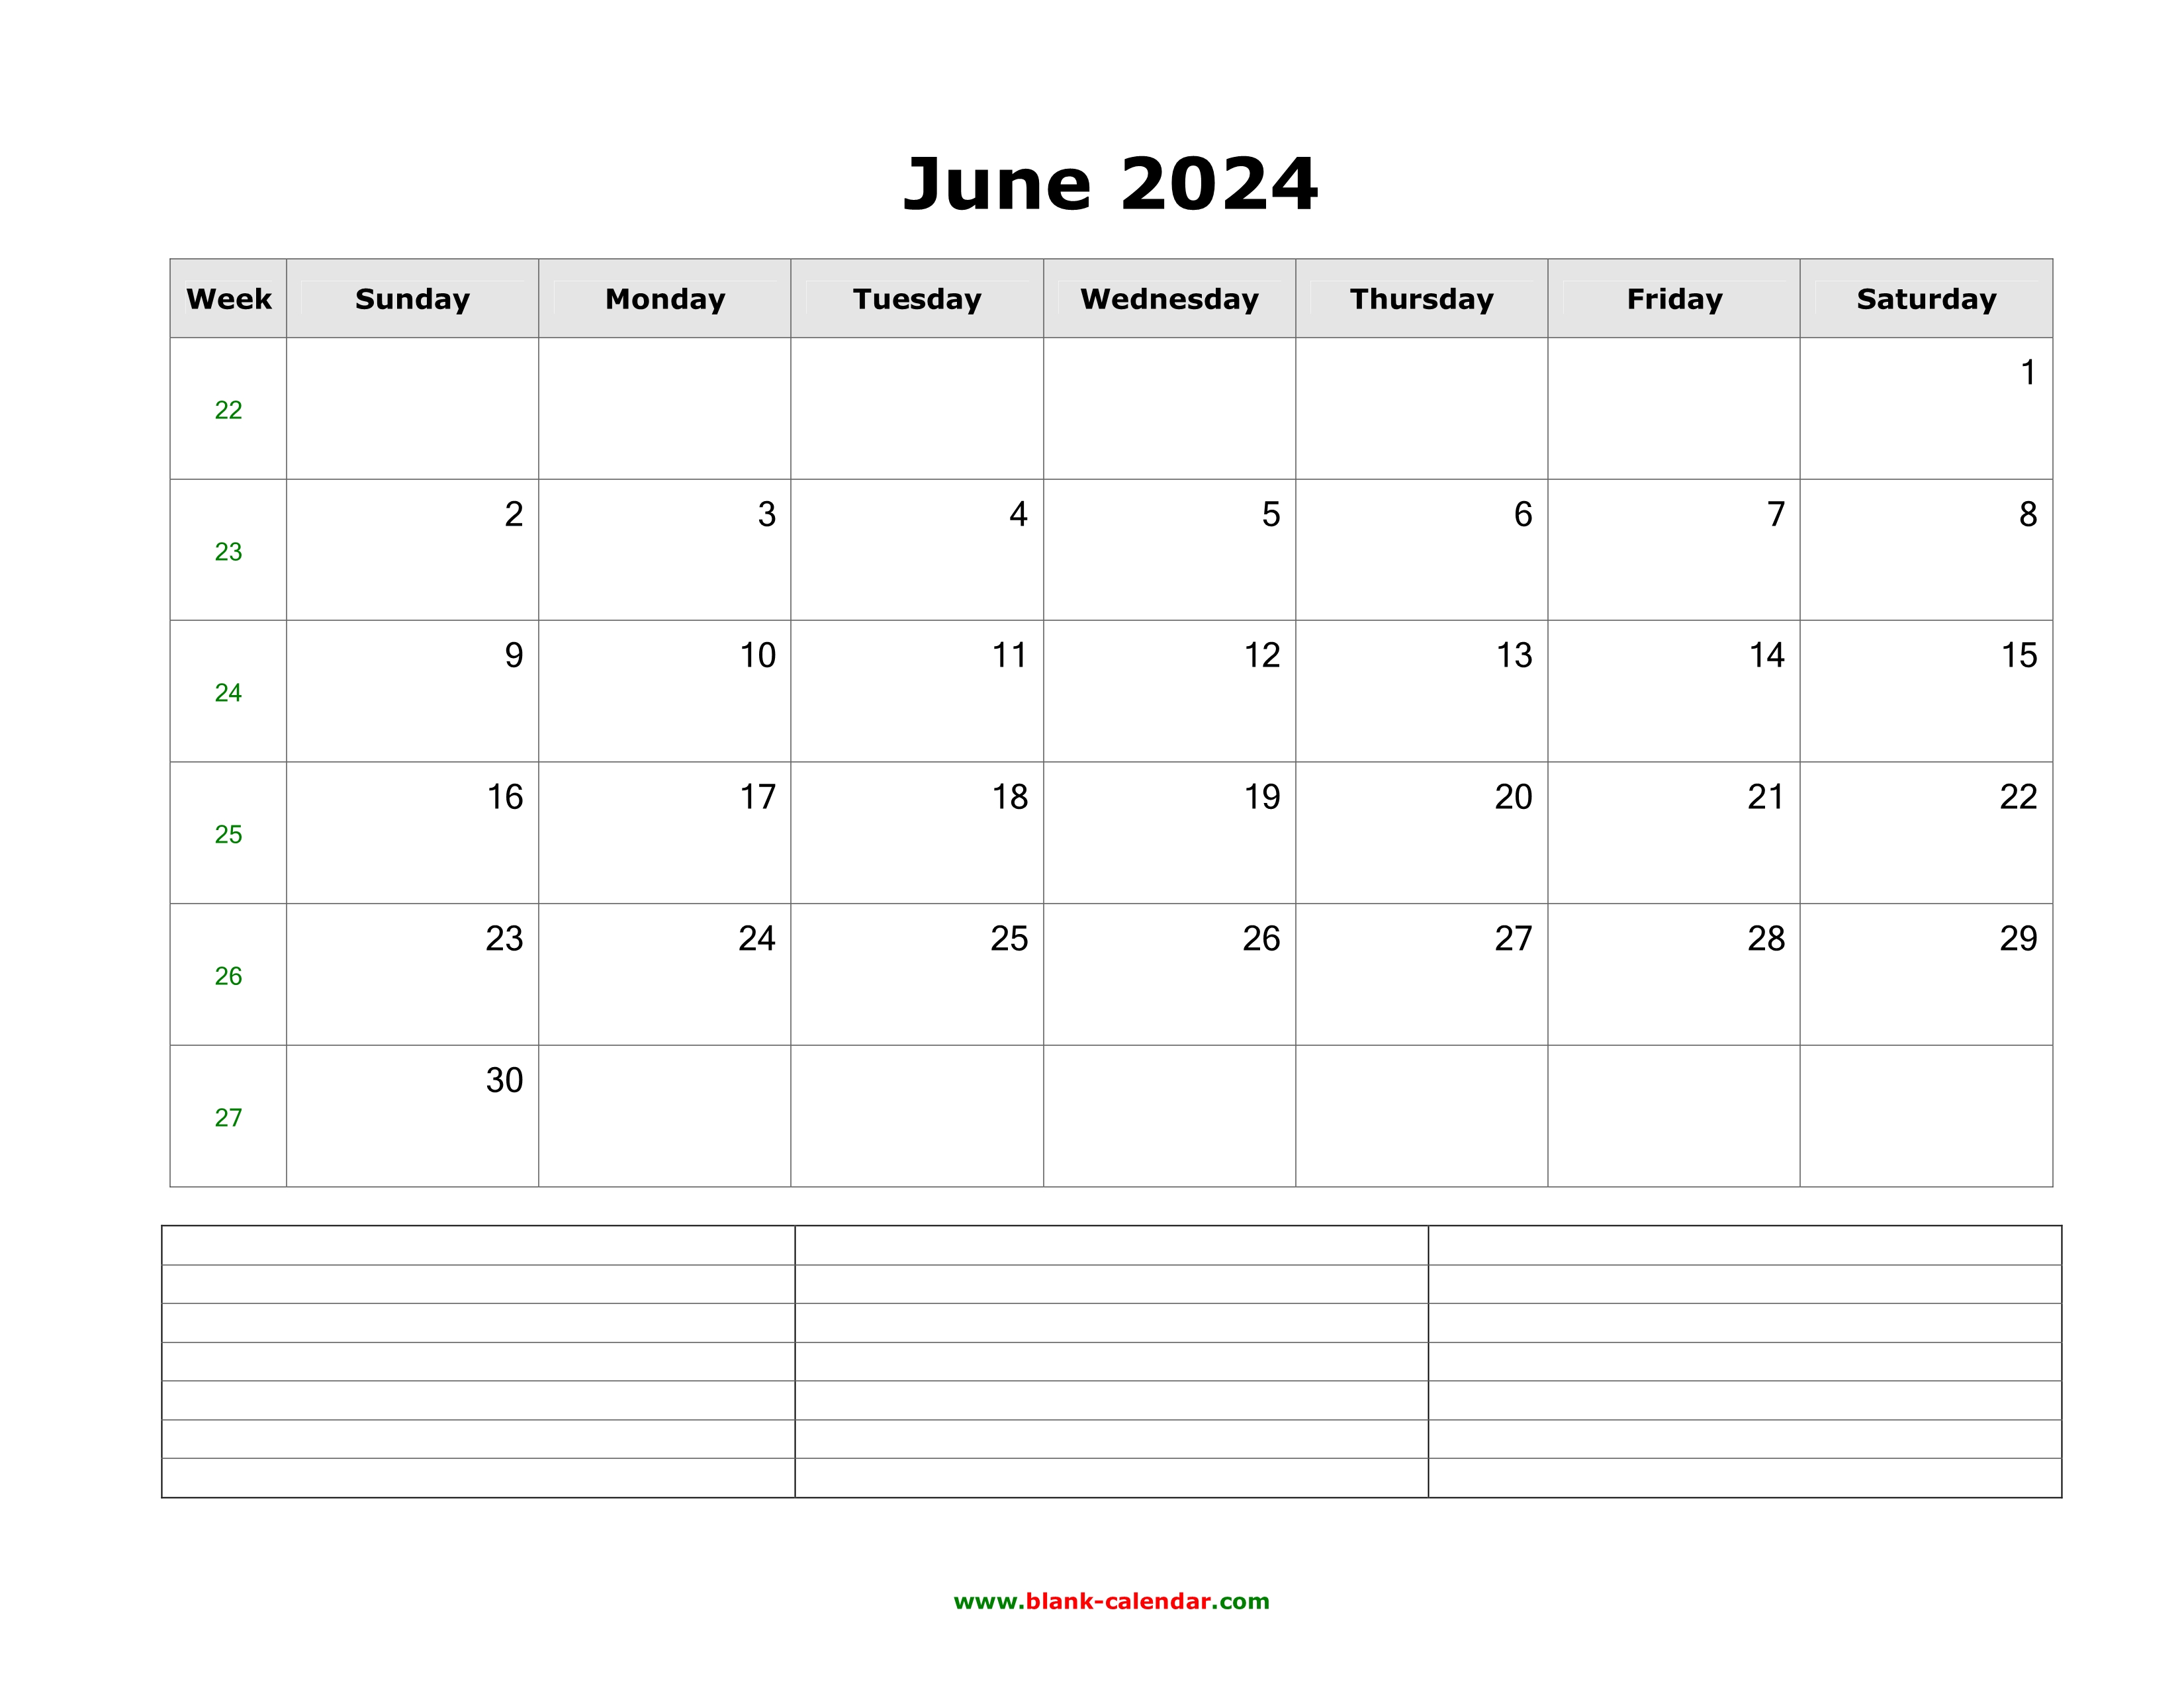 Download June 2024 Blank Calendar with Space for Notes (horizontal)